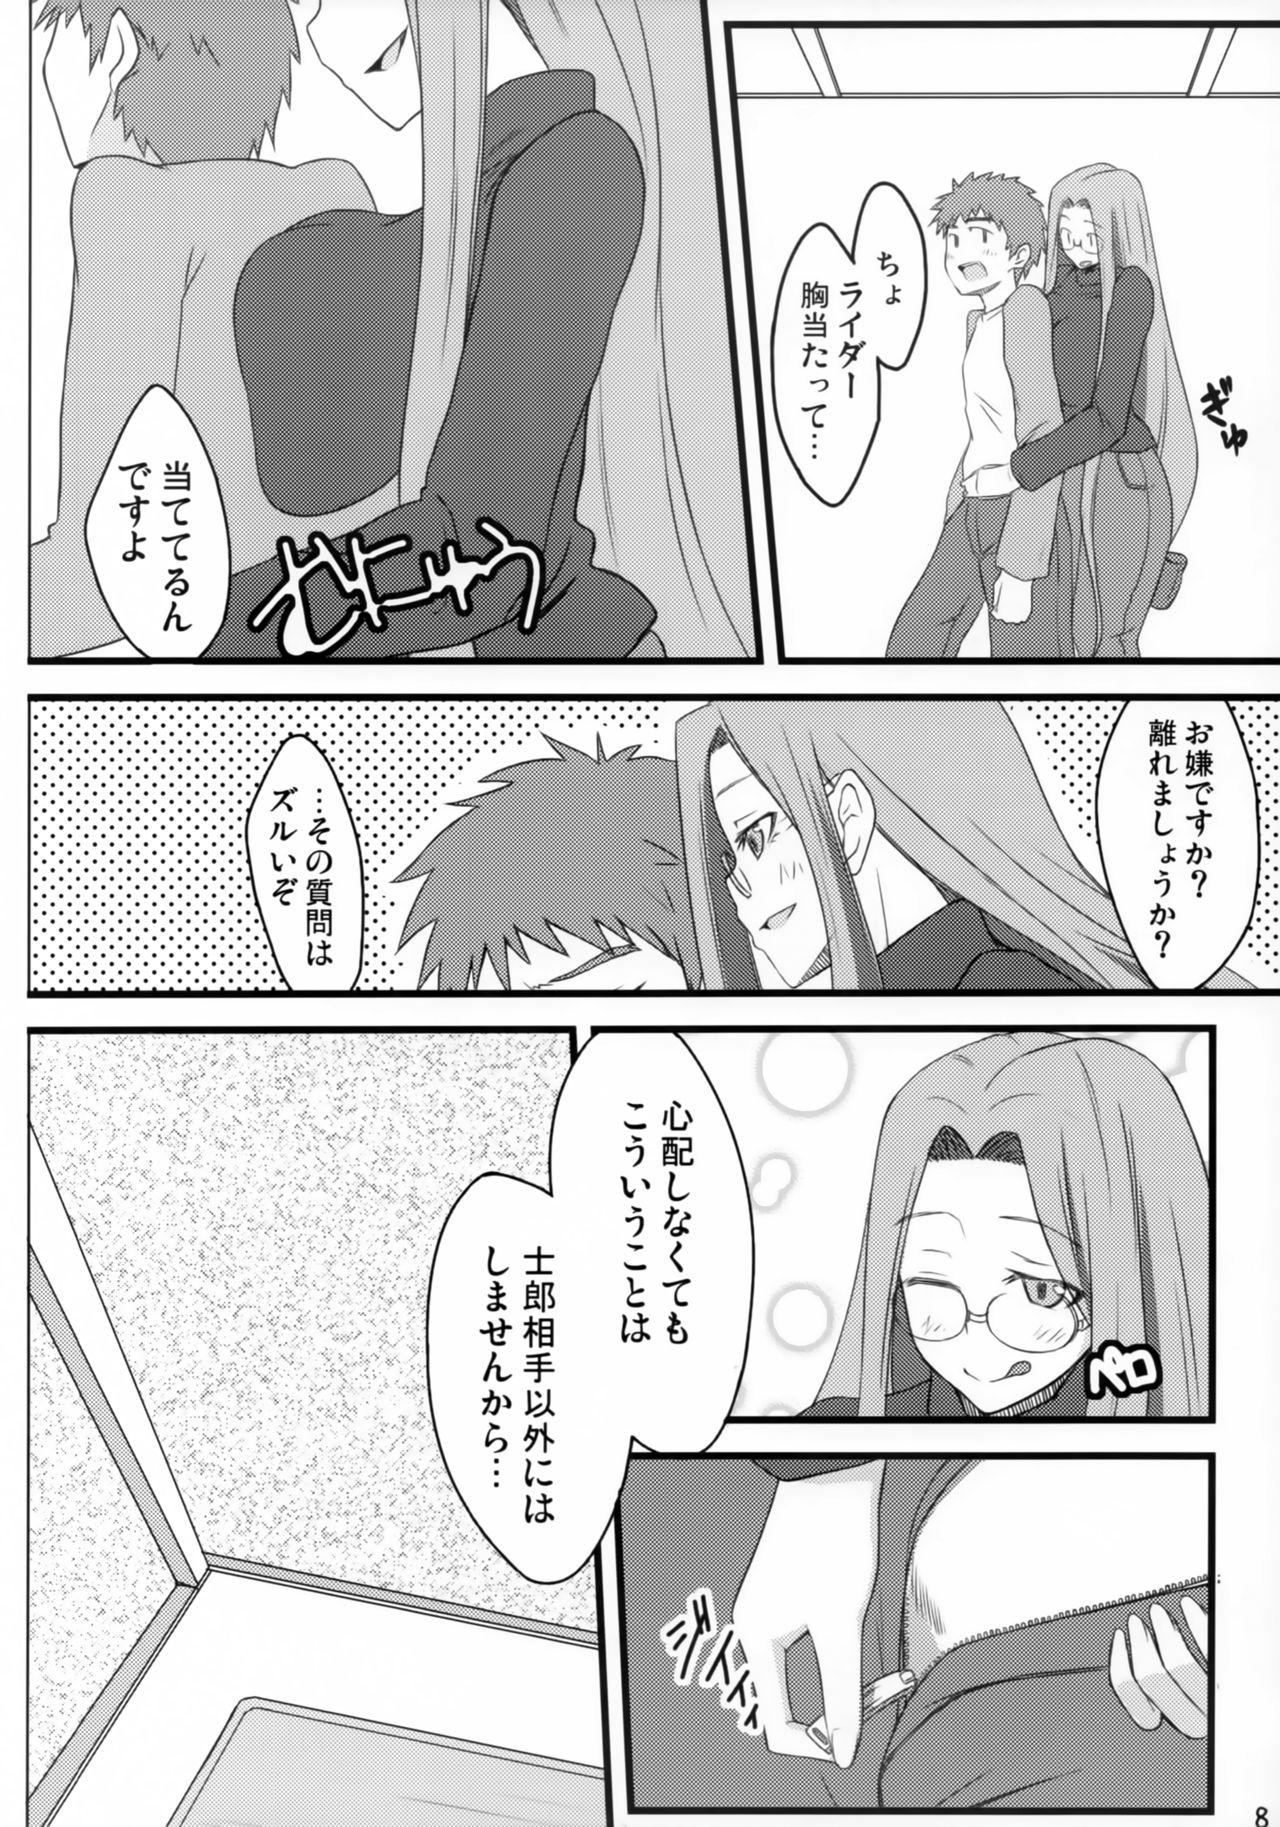 Passion R4 - Fate stay night Boy Girl - Page 7